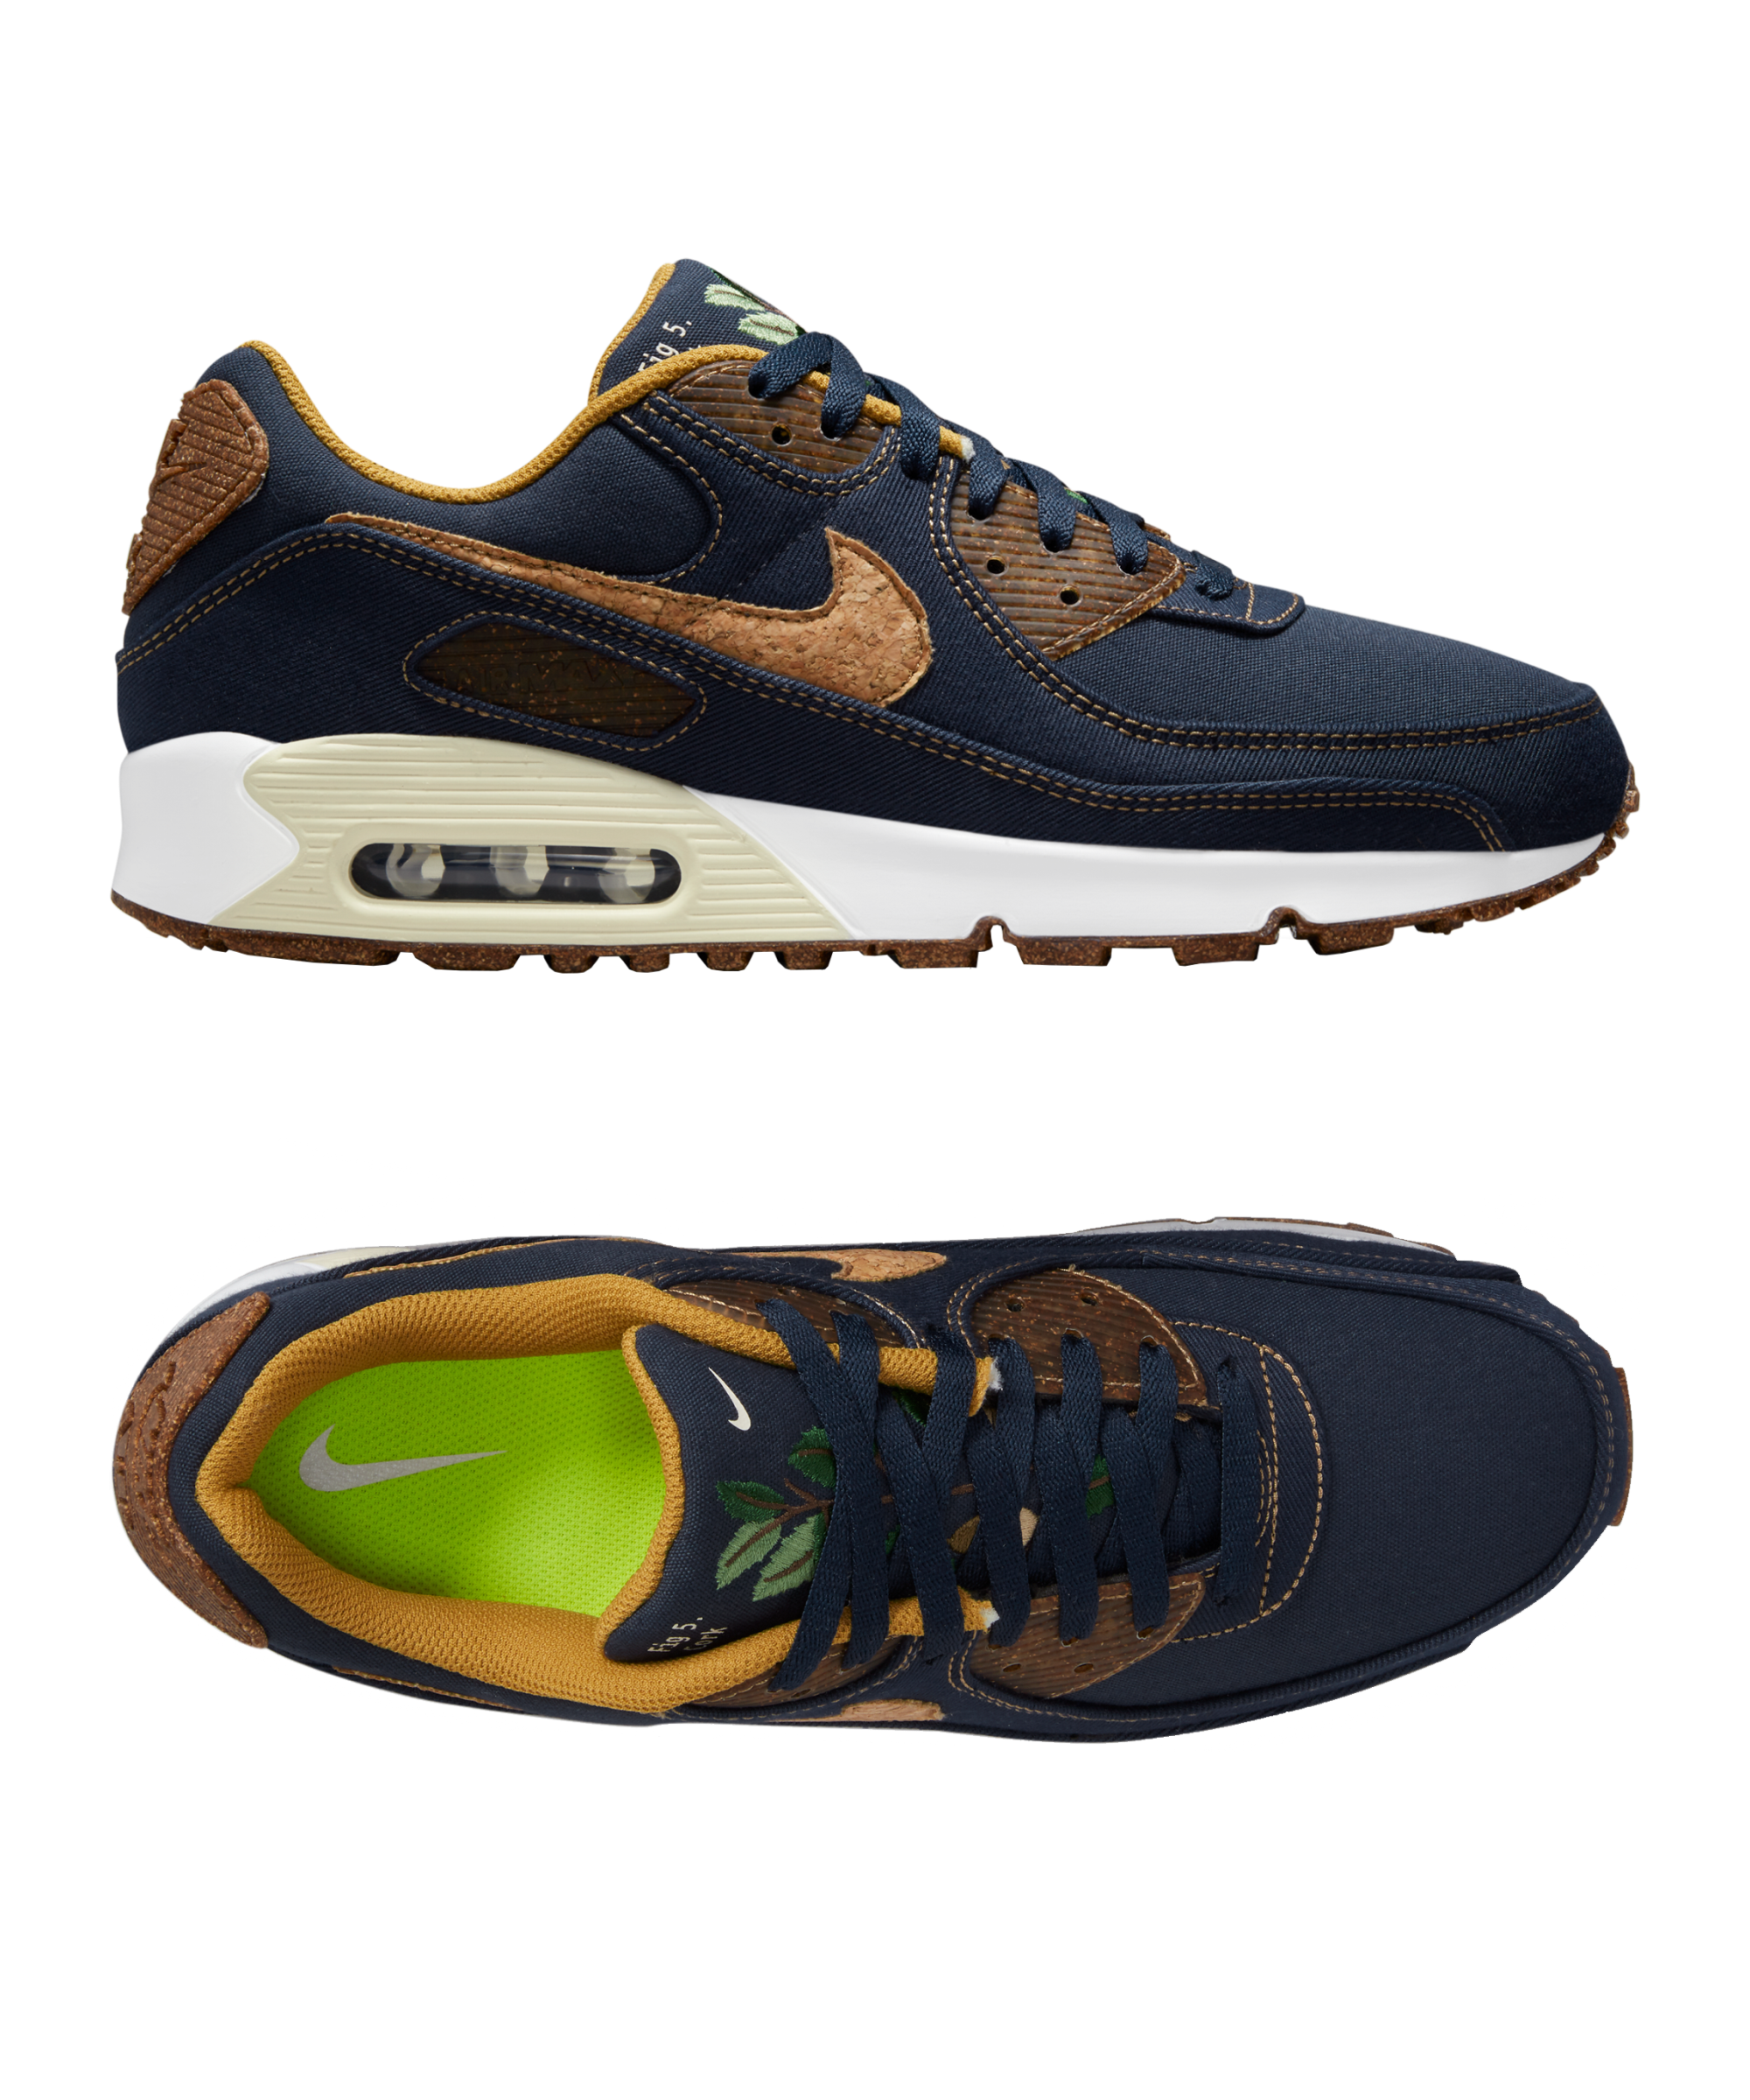 bus New meaning Easy to understand Nike Air Max 90 SE - Blue